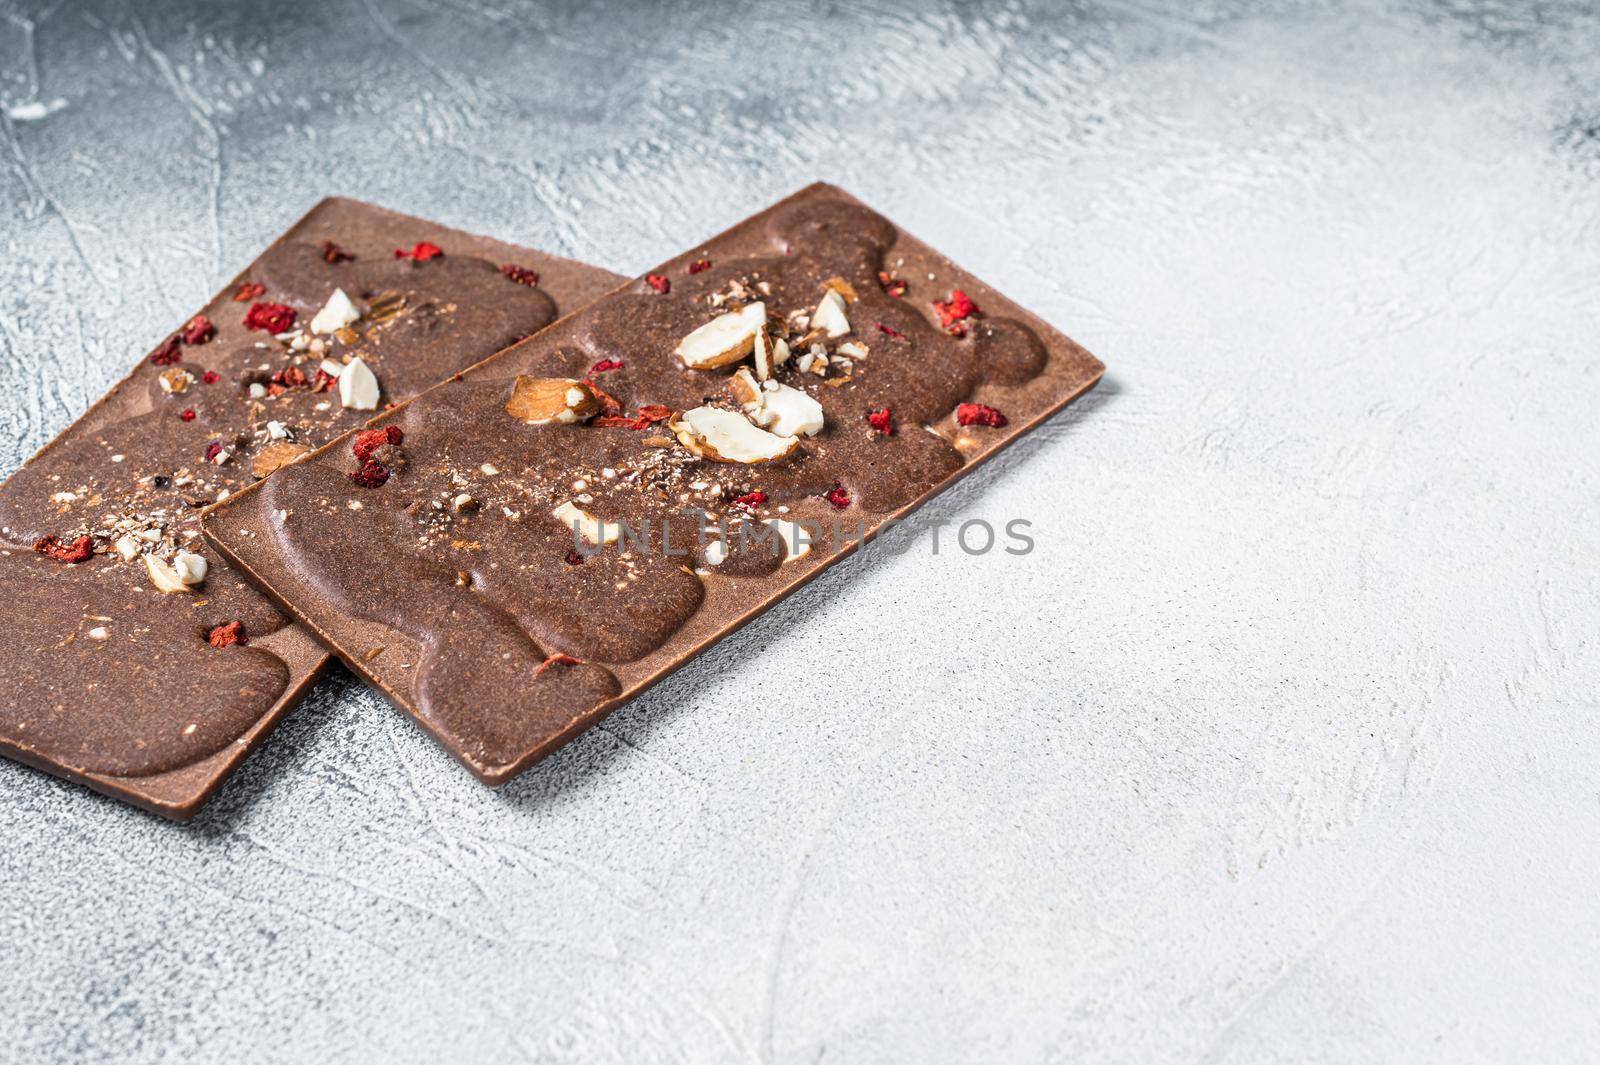 Craft homemade chocolate bars on kitchen table. White background. Top view. Copy space by Composter